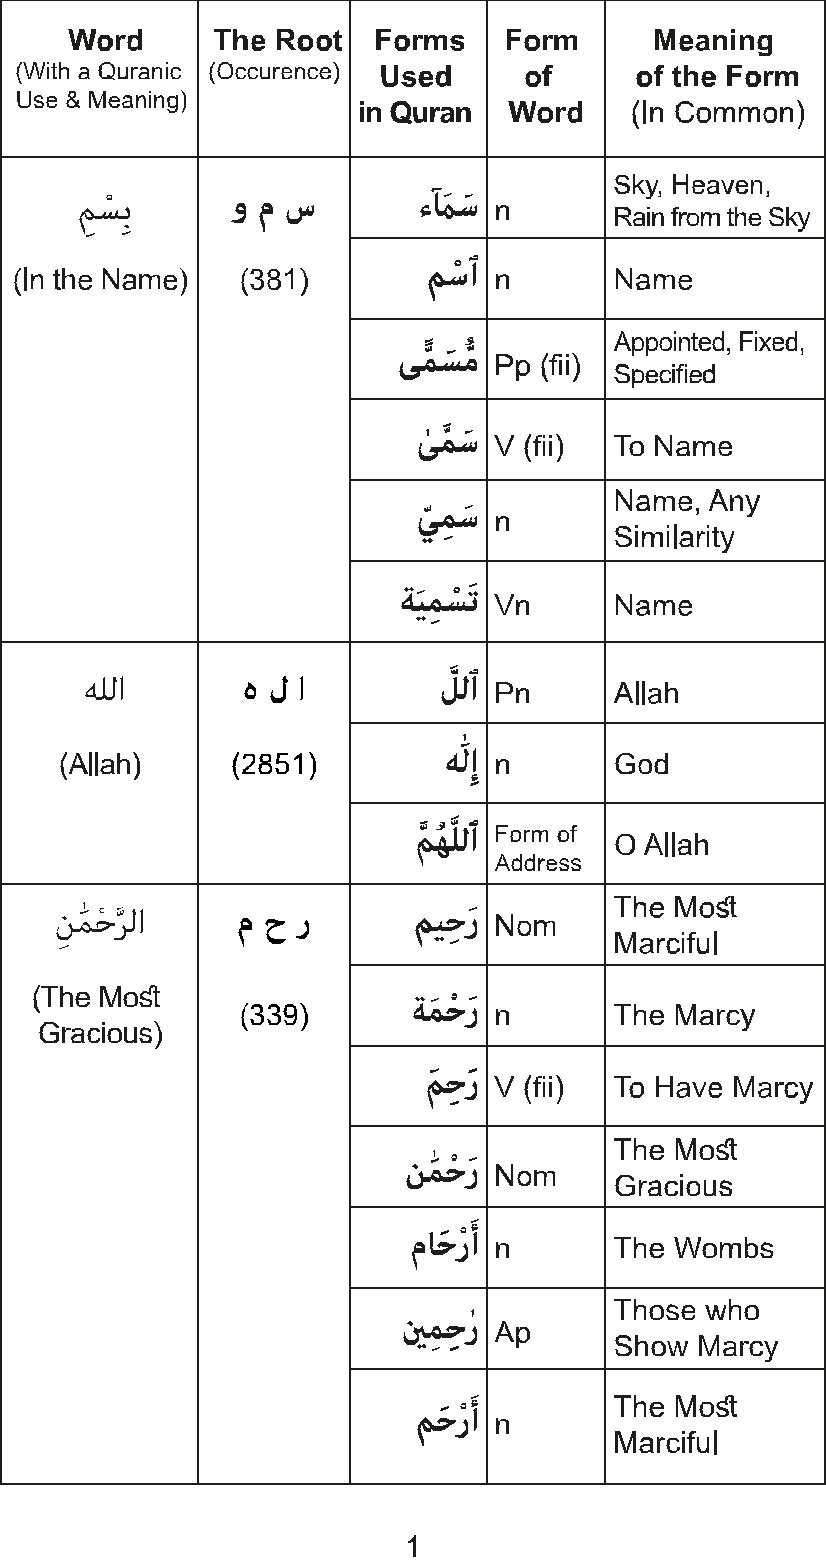 The Golden Words Dictionary of the Holy Quran - The Root Words and Their Forms - photo 3